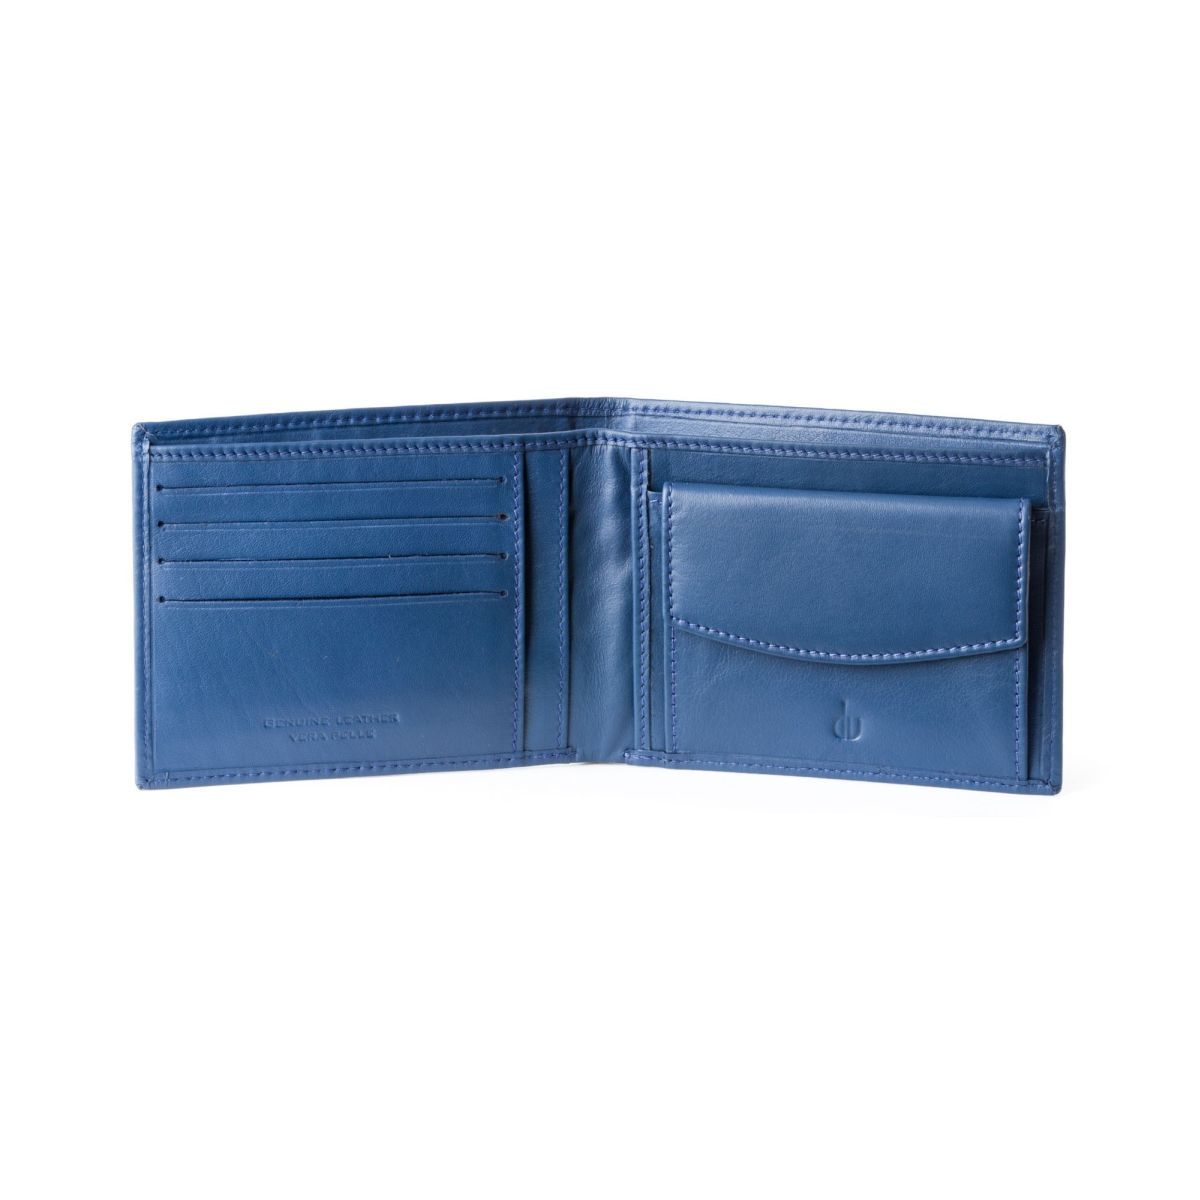 dv Slim Leather wallet with coin purse - Blue